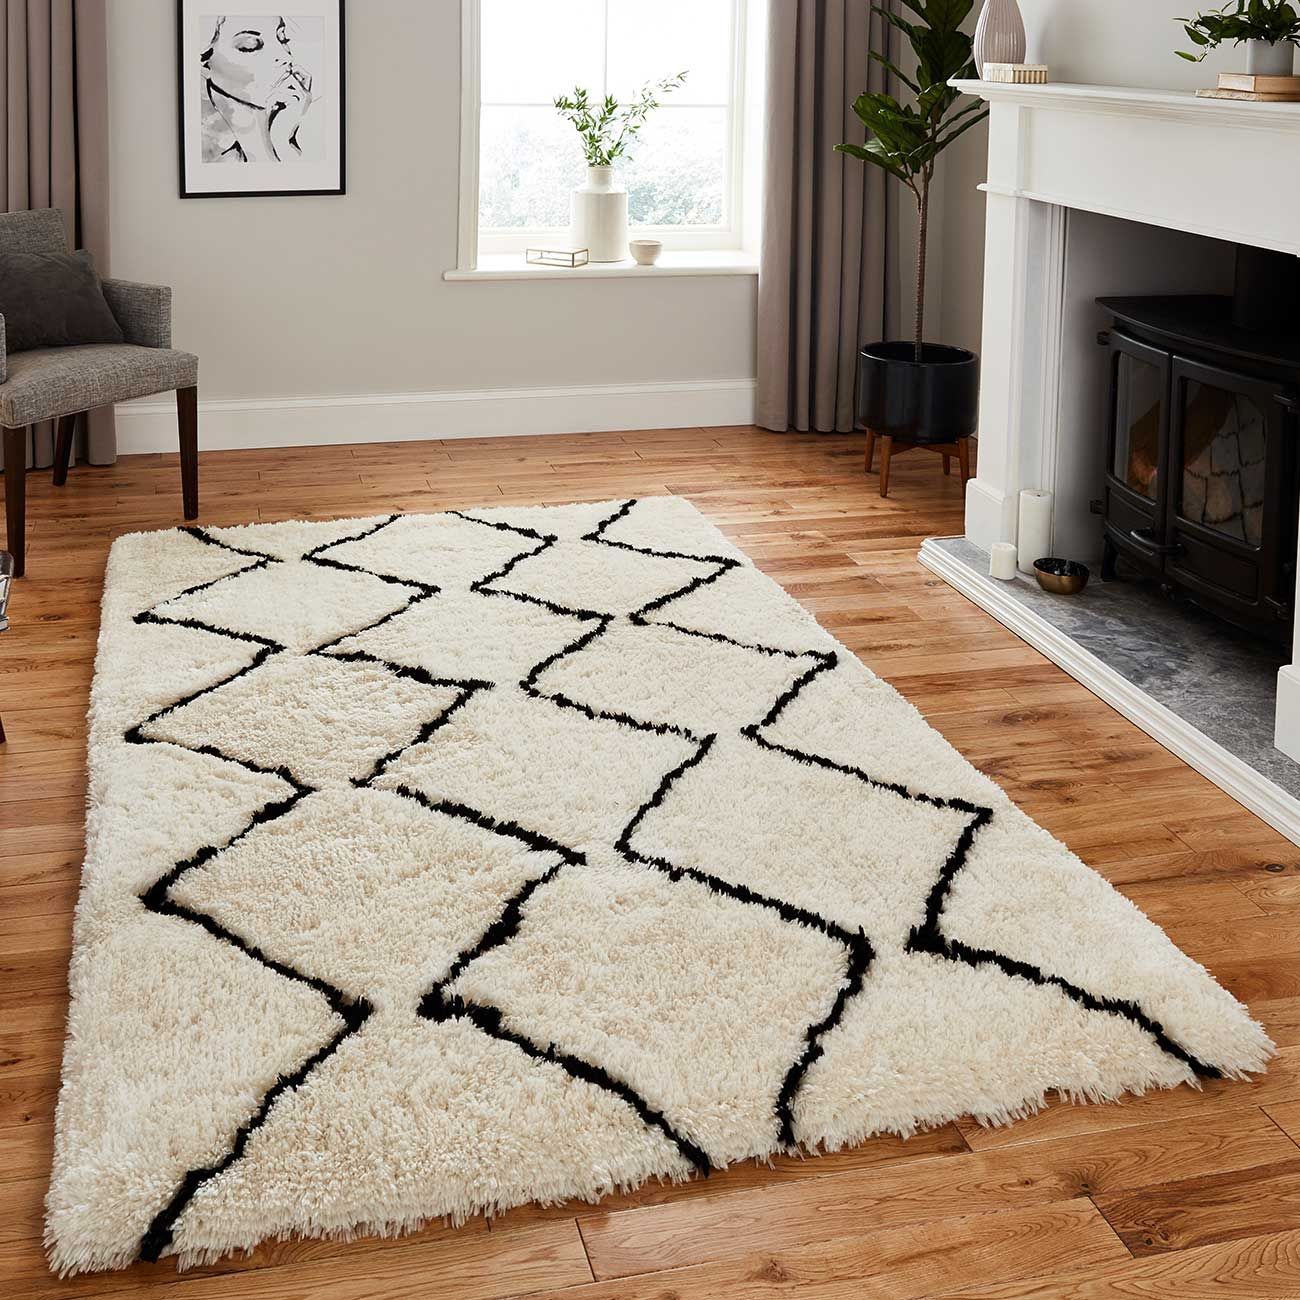 Buy Online Think Rugs Morocco 3742 Ivory/Black Shaggy Rug – Therugshopuk In Ivory Black Rugs (View 8 of 15)